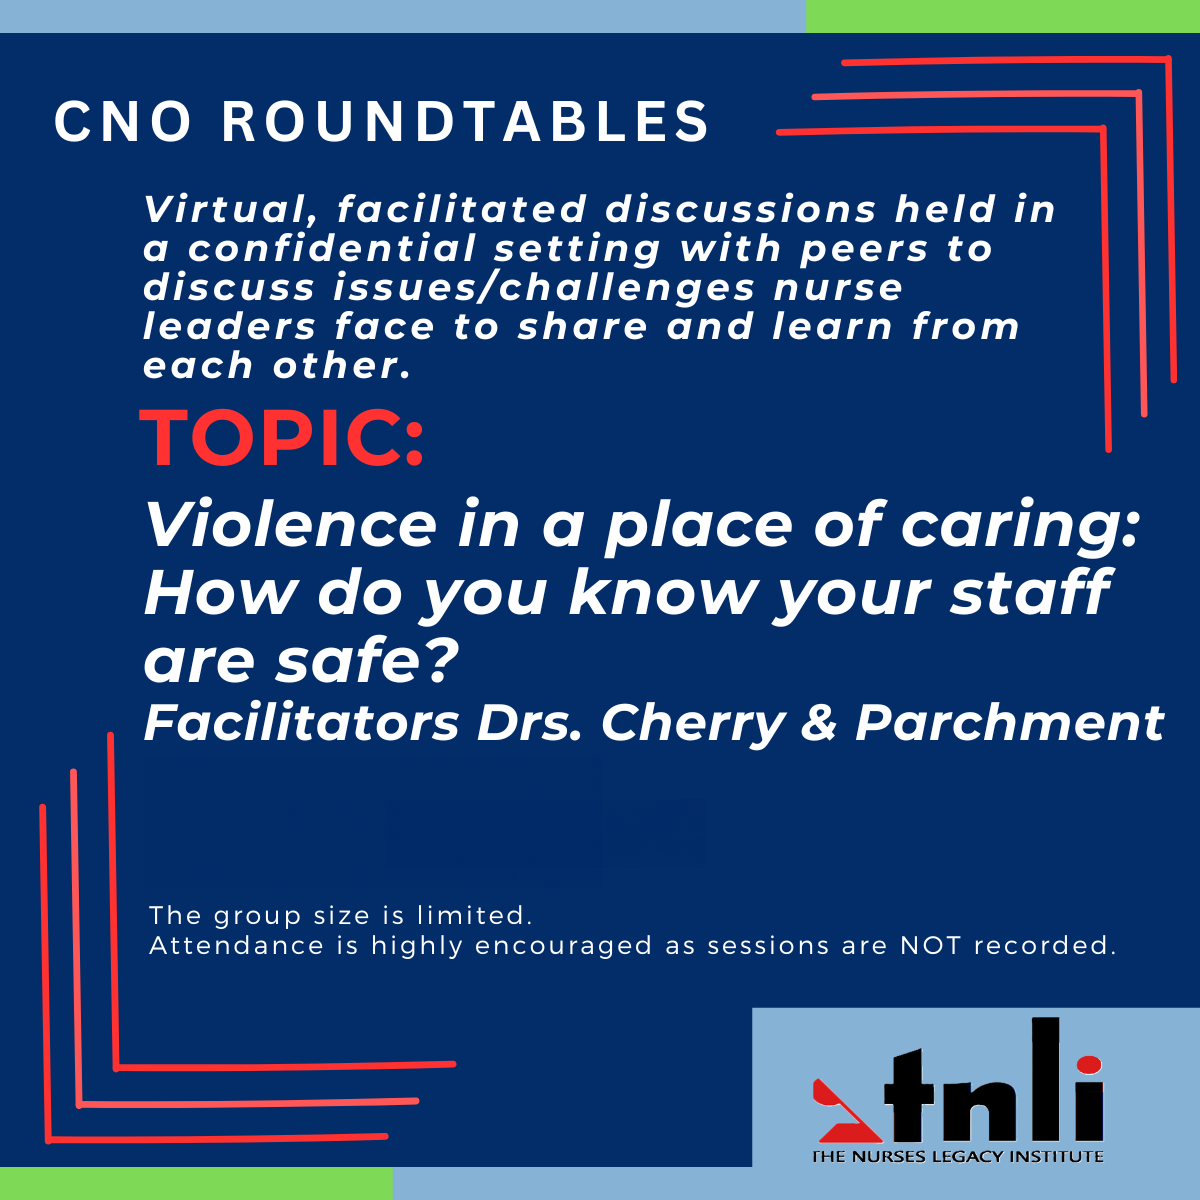 CNO ROUNDTABLES